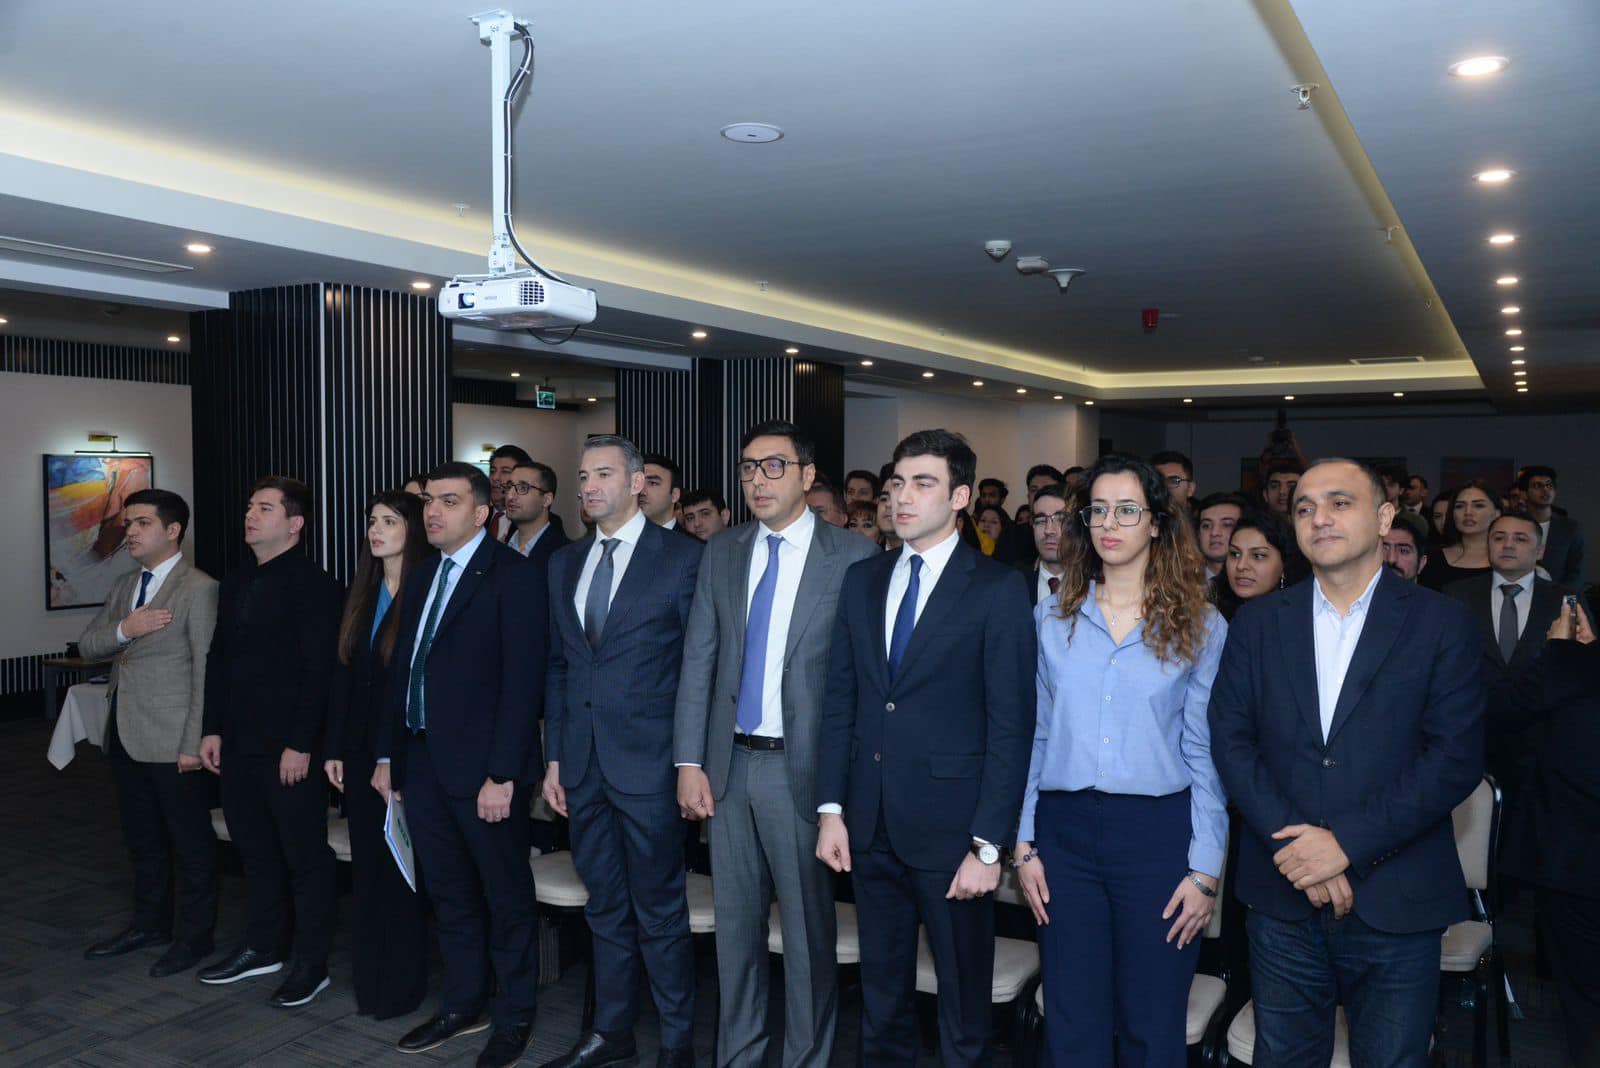 #BirkimiBirlikdə - Networking and Development Forum of Youth Organizations was held as part of "Youth Week" with the initiative of the Ministry of Youth and Sports, the partnership of the Youth Fund, and the organization of the National Council of Youth Organizations (NAYORA).